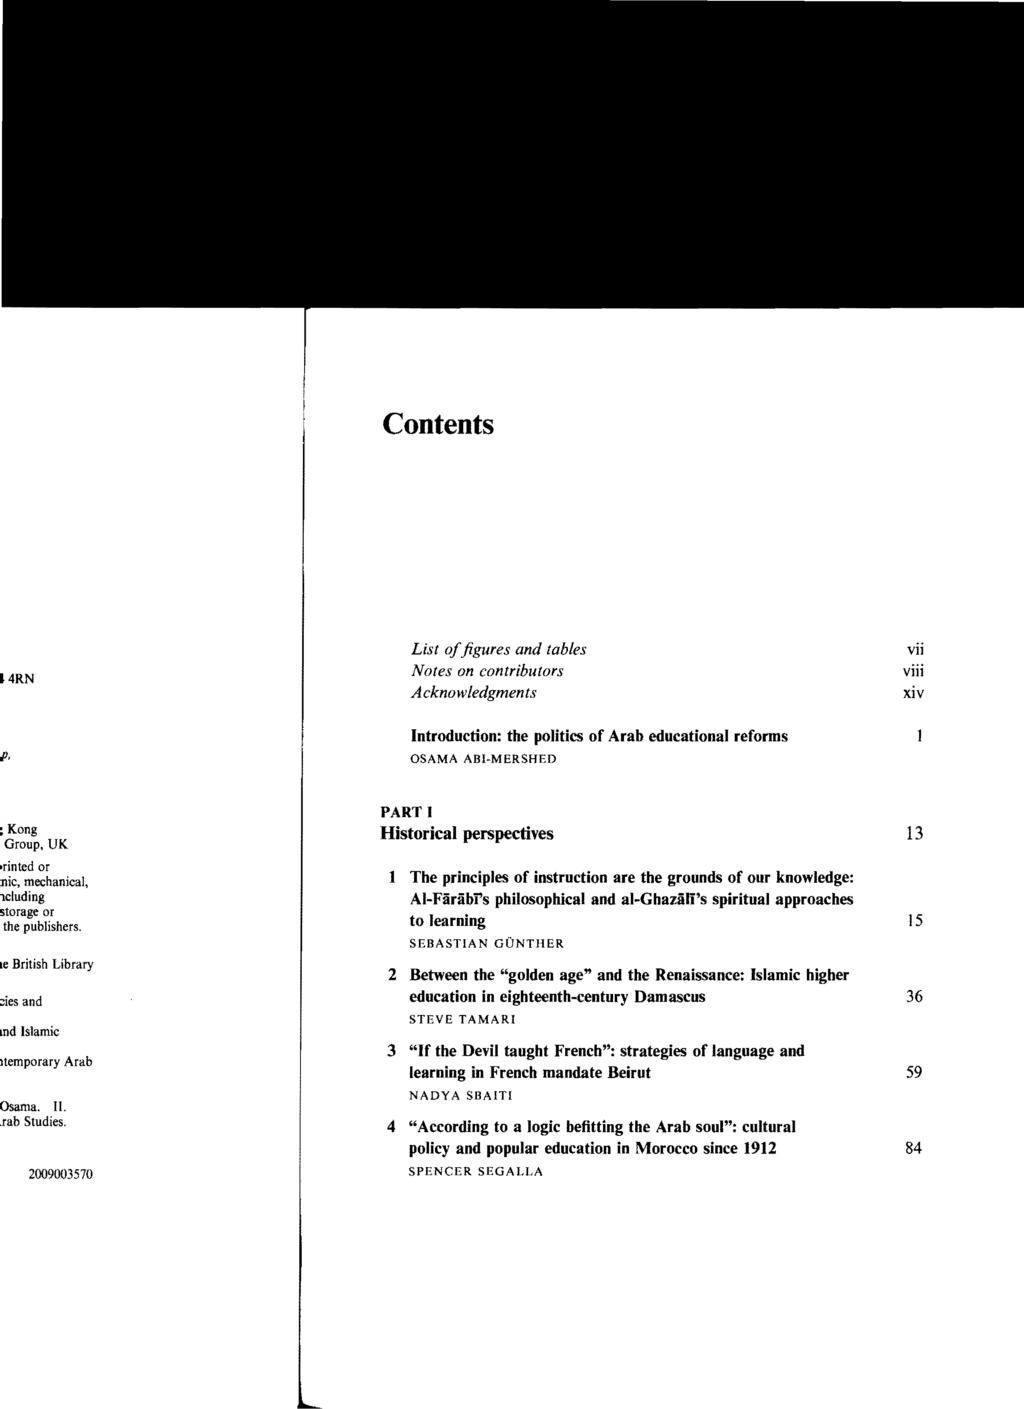 Contents List offigures and tables Notes on contributors Acknowledgments vii viii xiv Introduction: the politics of Arab educational refonns OSAMA ABI MERSHED PART I Historical perspectives 13 1 The